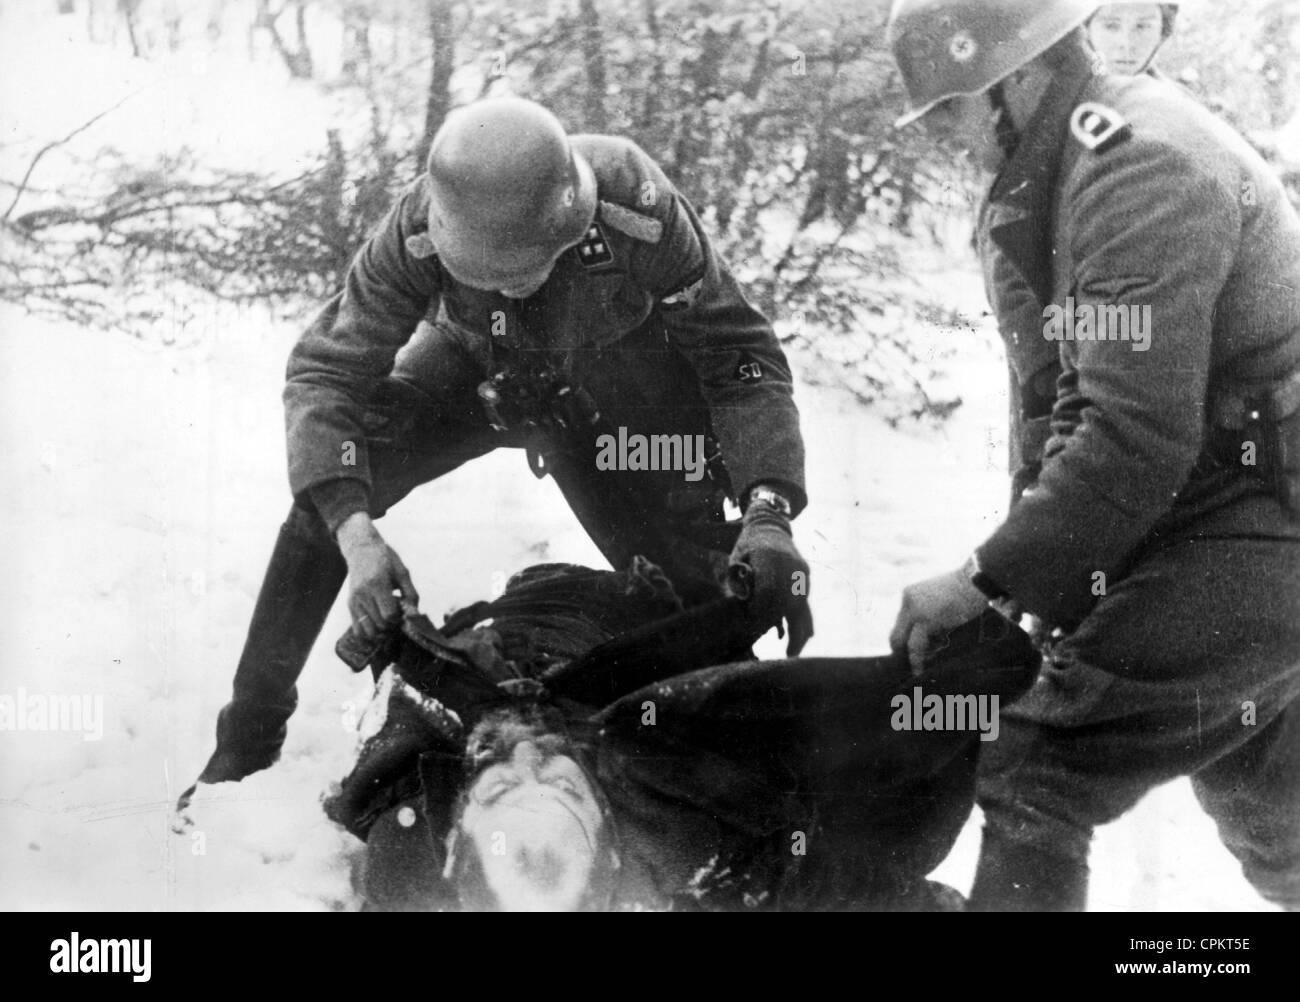 Soldiers of the Waffen SS on the Eastern front search a liquidated Jewish partisan, 1942 Stock Photo